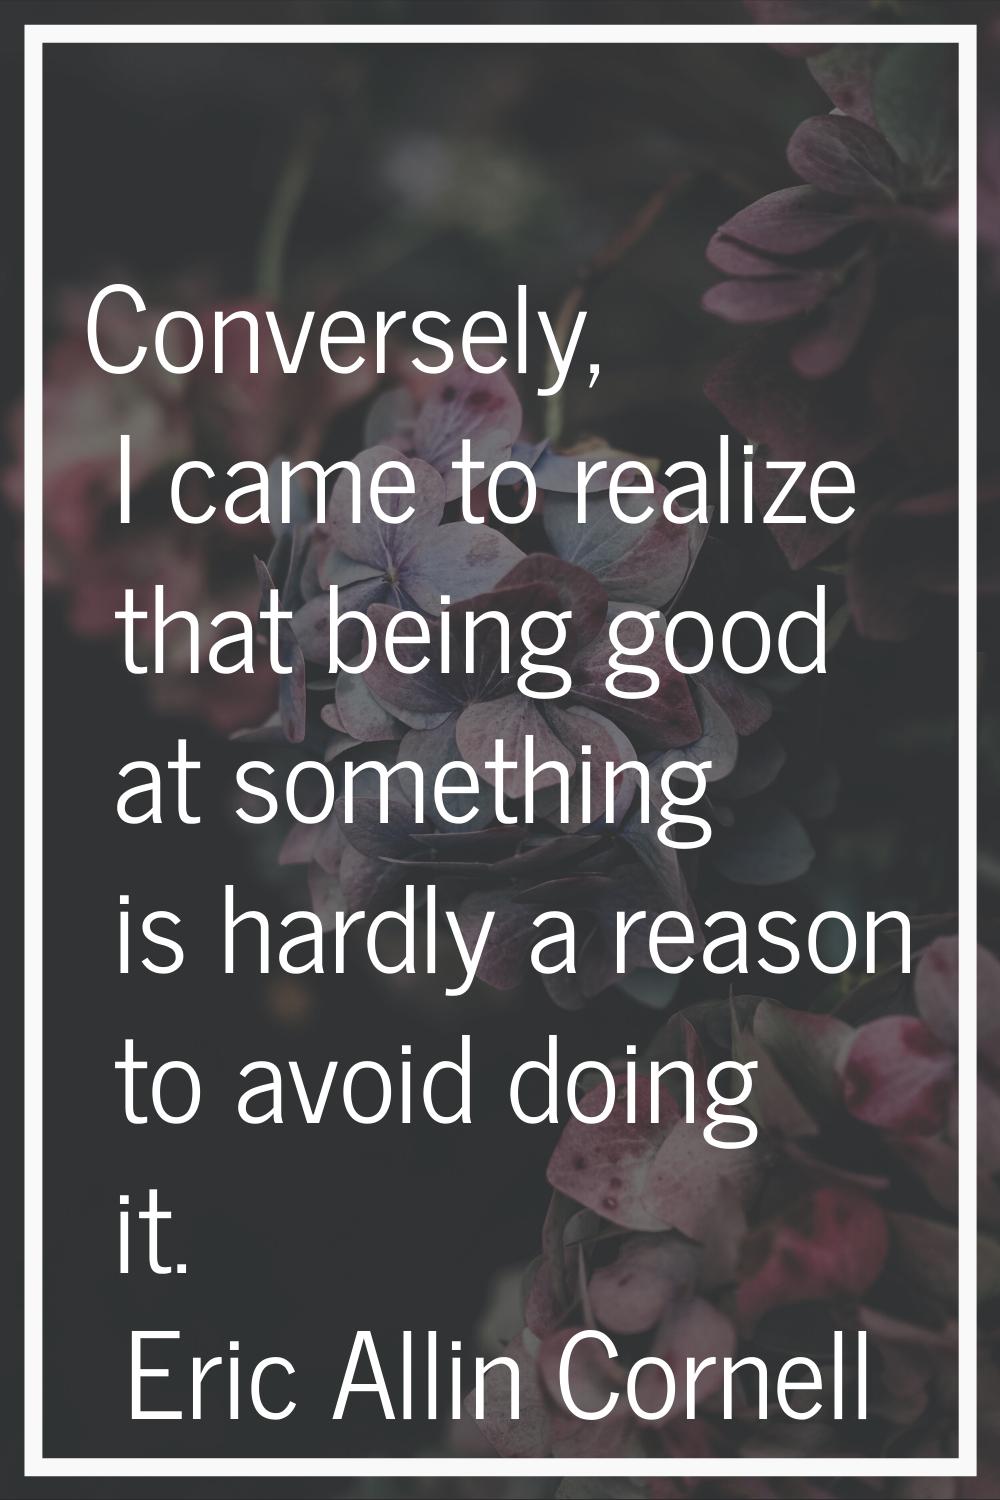 Conversely, I came to realize that being good at something is hardly a reason to avoid doing it.